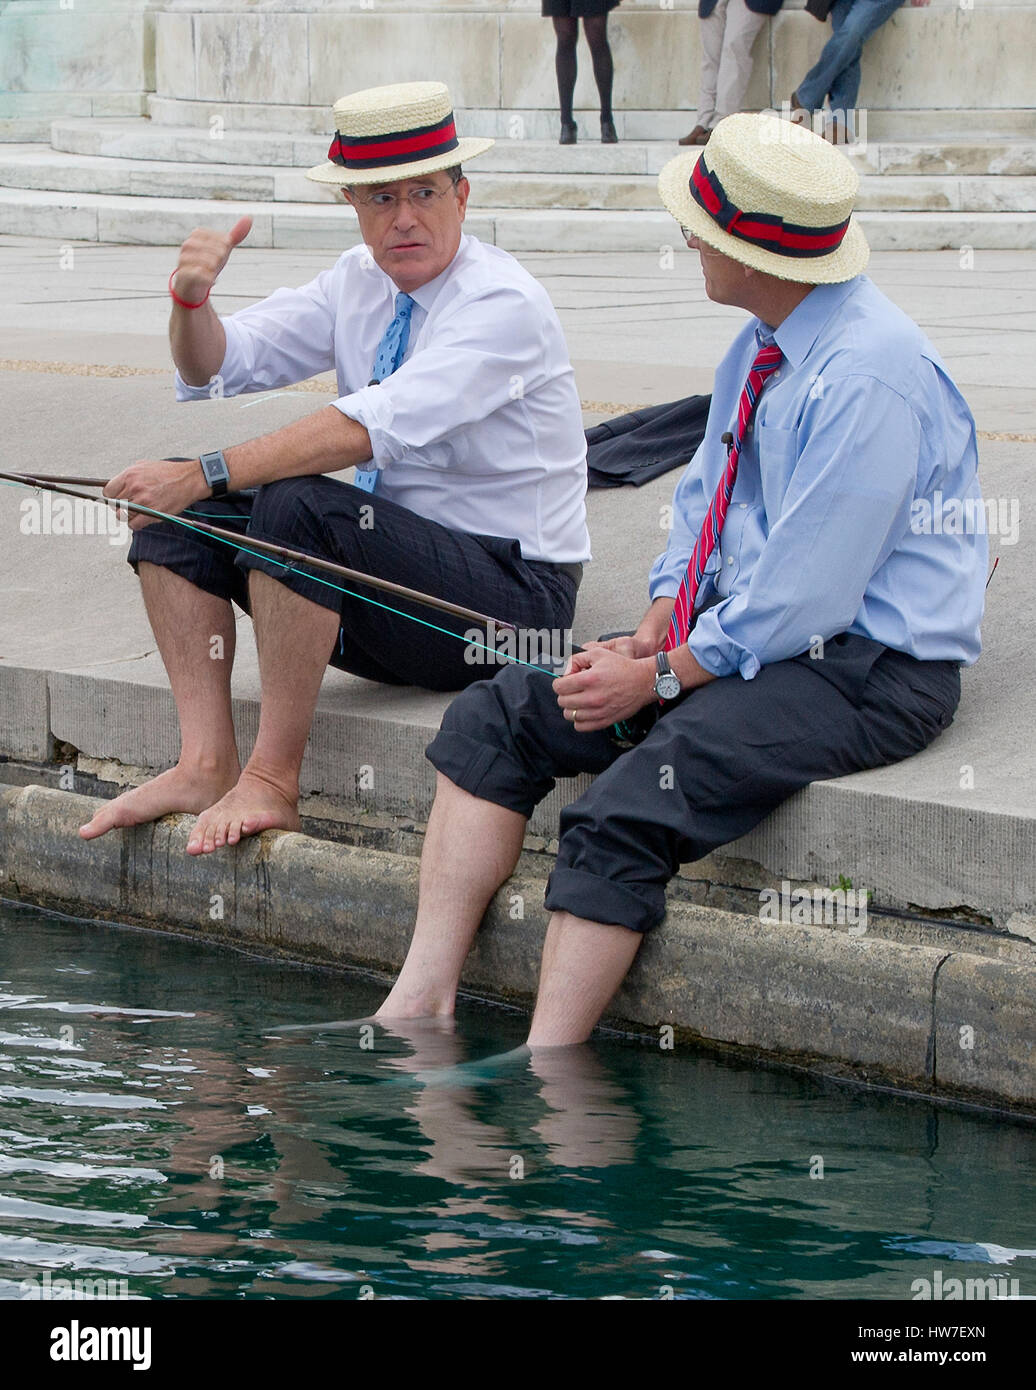 Stephen Colbert host of the Comedy Central show 'The Colbert Report' works on bit with United States Representative Jack Kingston (Democrat of Georgia) where they appear to be fishing in U.S. Capitol Reflecting Pool in Washington D.C. on Friday October 3 Stock Photo